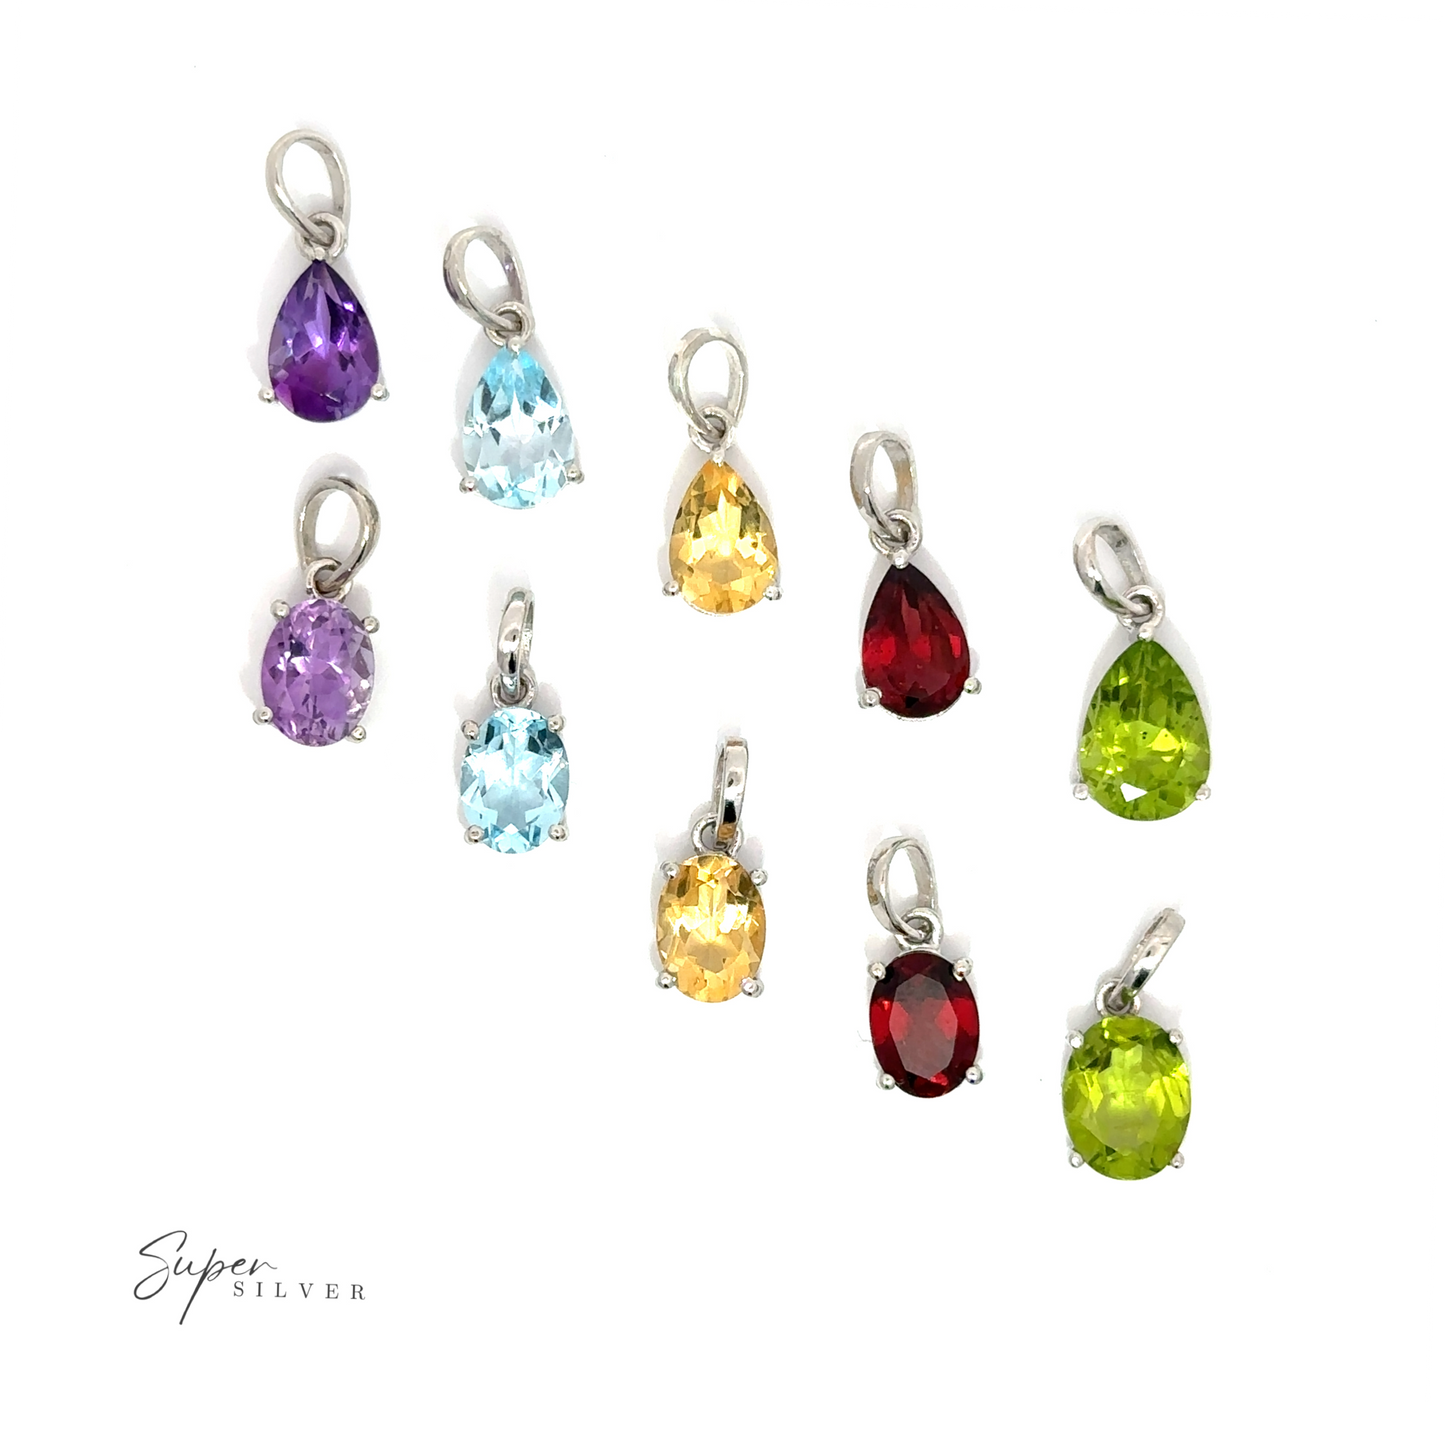 A group of Dainty Faceted Gemstone Pendants in minimalist style.